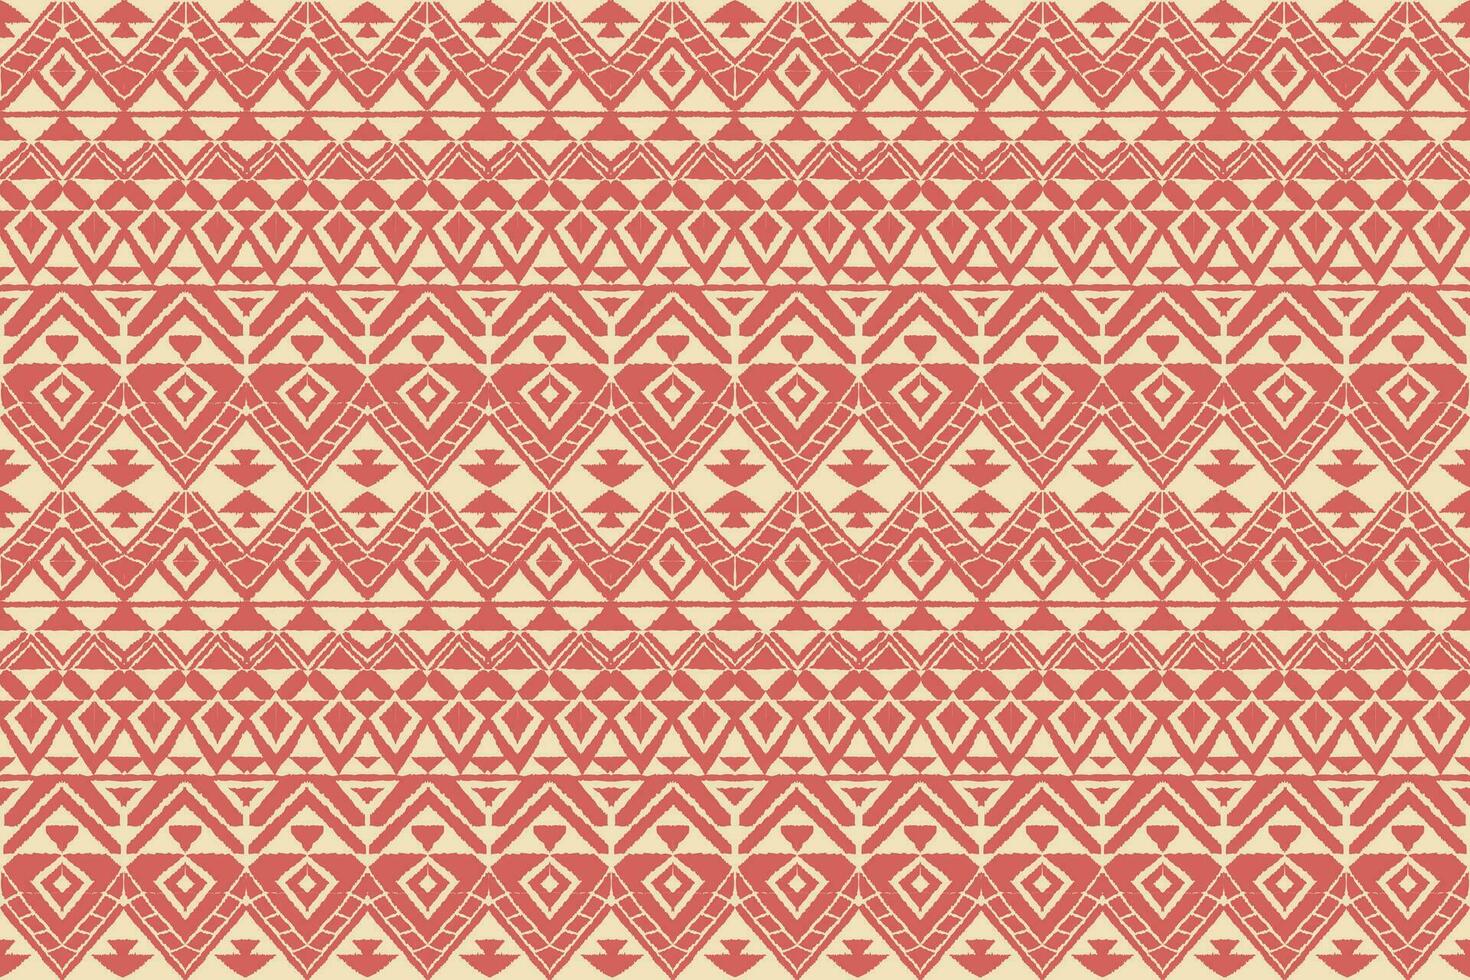 Modern Ikat geometric folklore ornament with diamonds. Tribal ethnic vector texture. seamless striped pattern in Aztec style. Folk embroidery. Indian. Scandinavian. Gypsy. African rug.